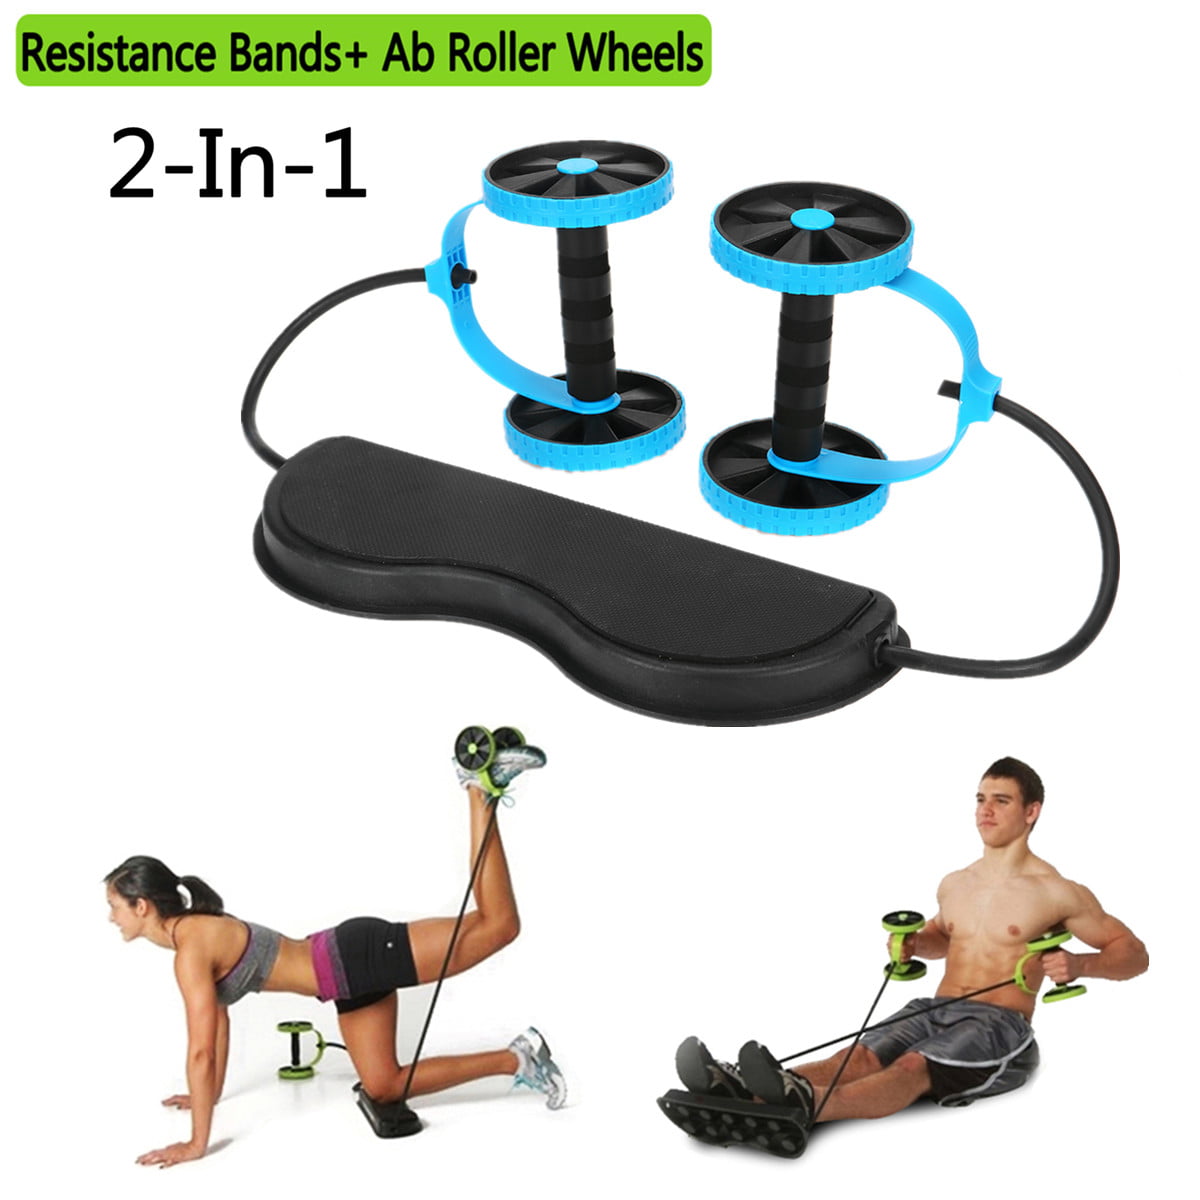 FORIDE Wheel Roller Abdominal Exercise Power Roller Machine Dual Wheel with Foam Knee Pad For Strength Training Body Fitness Workout Home-Gym